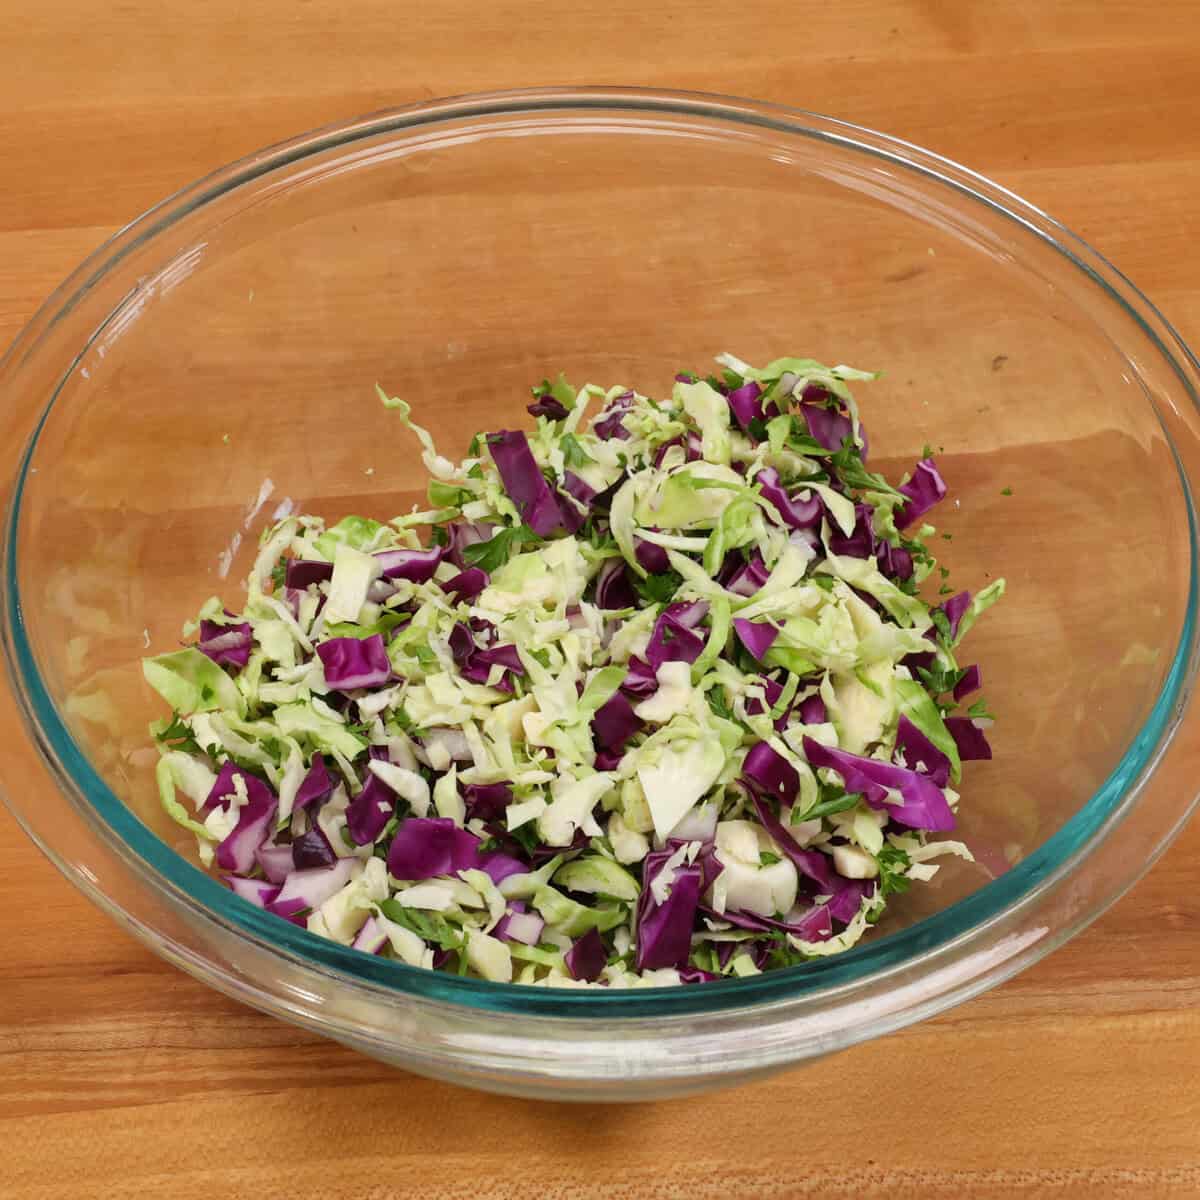 shaved brussels sprouts, chopped cabbage, and other chopped vegetables in a mixing bowl.